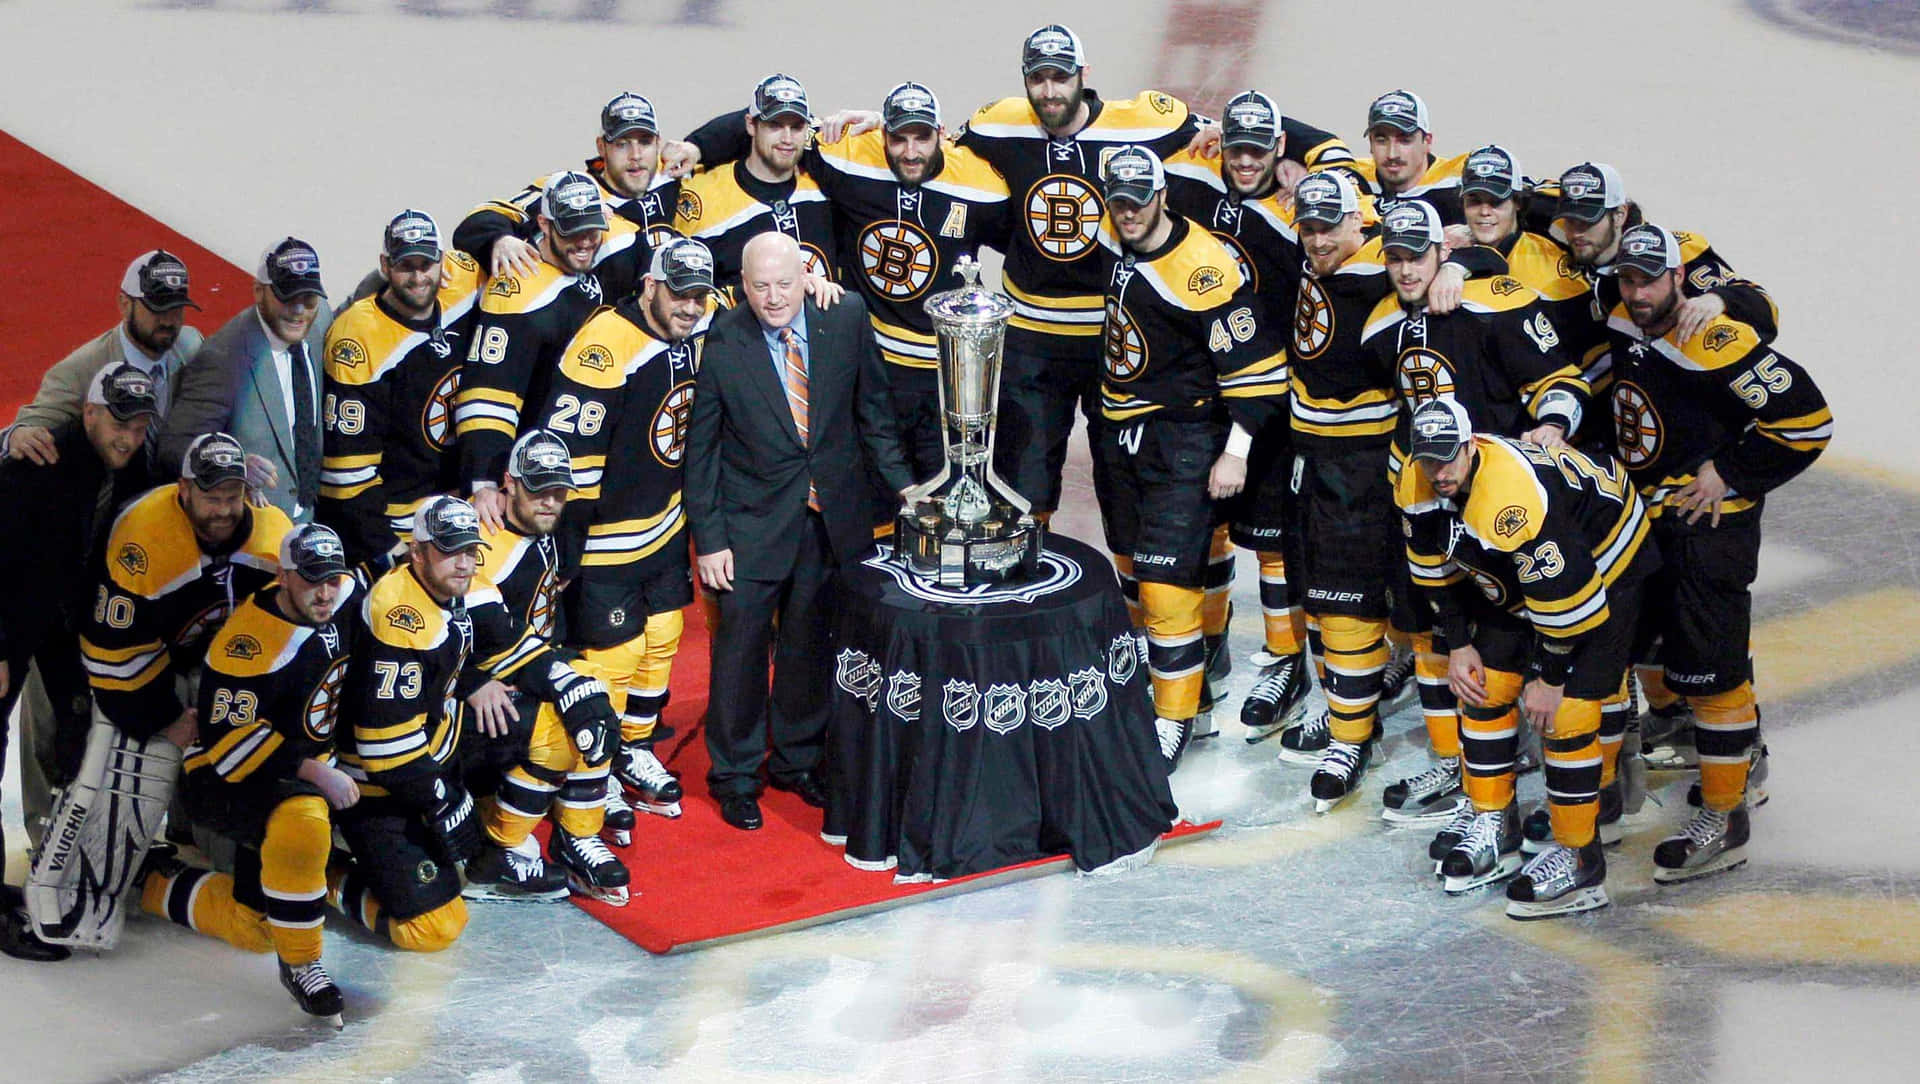 The Boston Bruins Team Pose With The Cup